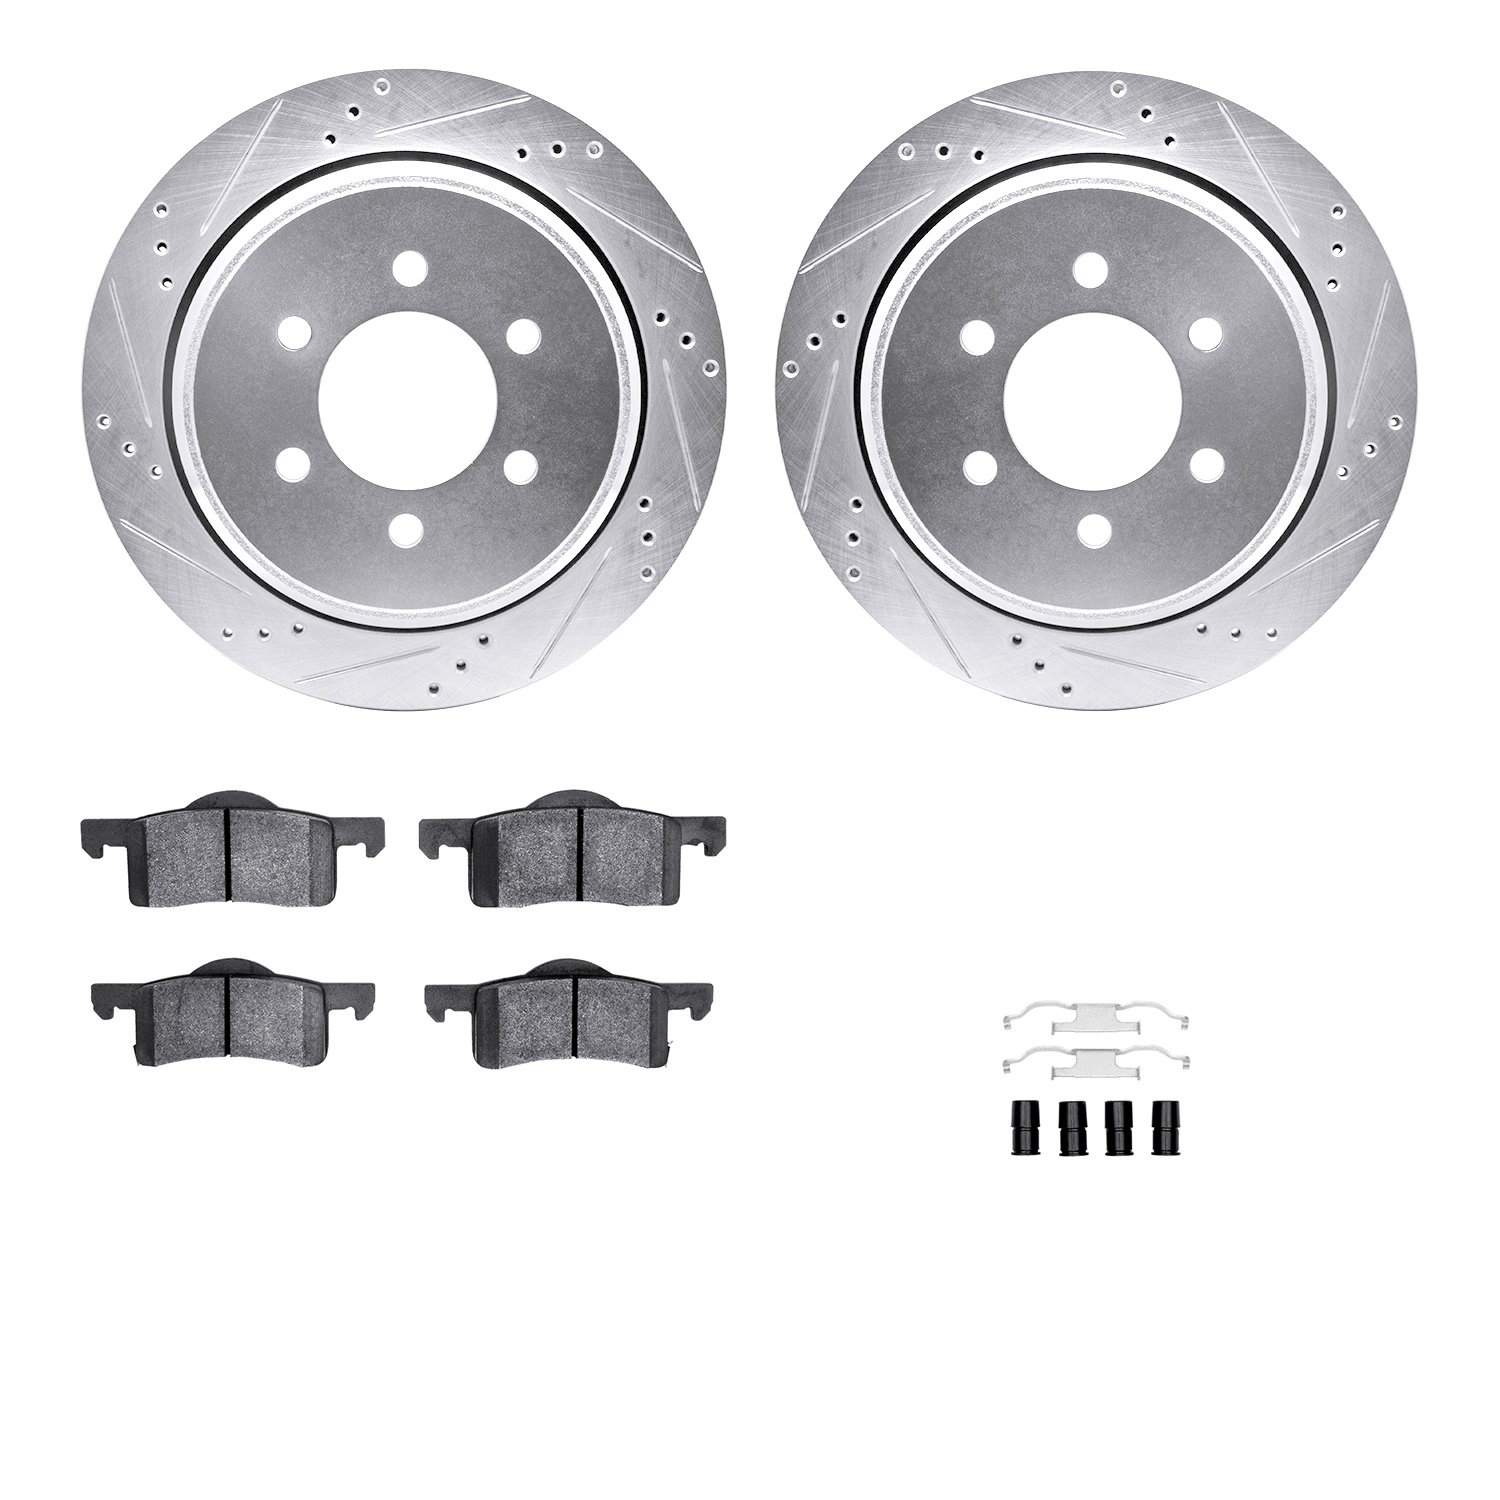 7212-99179 Drilled/Slotted Rotors w/Heavy-Duty Brake Pads Kit & Hardware [Silver], 2002-2006 Ford/Lincoln/Mercury/Mazda, Positio